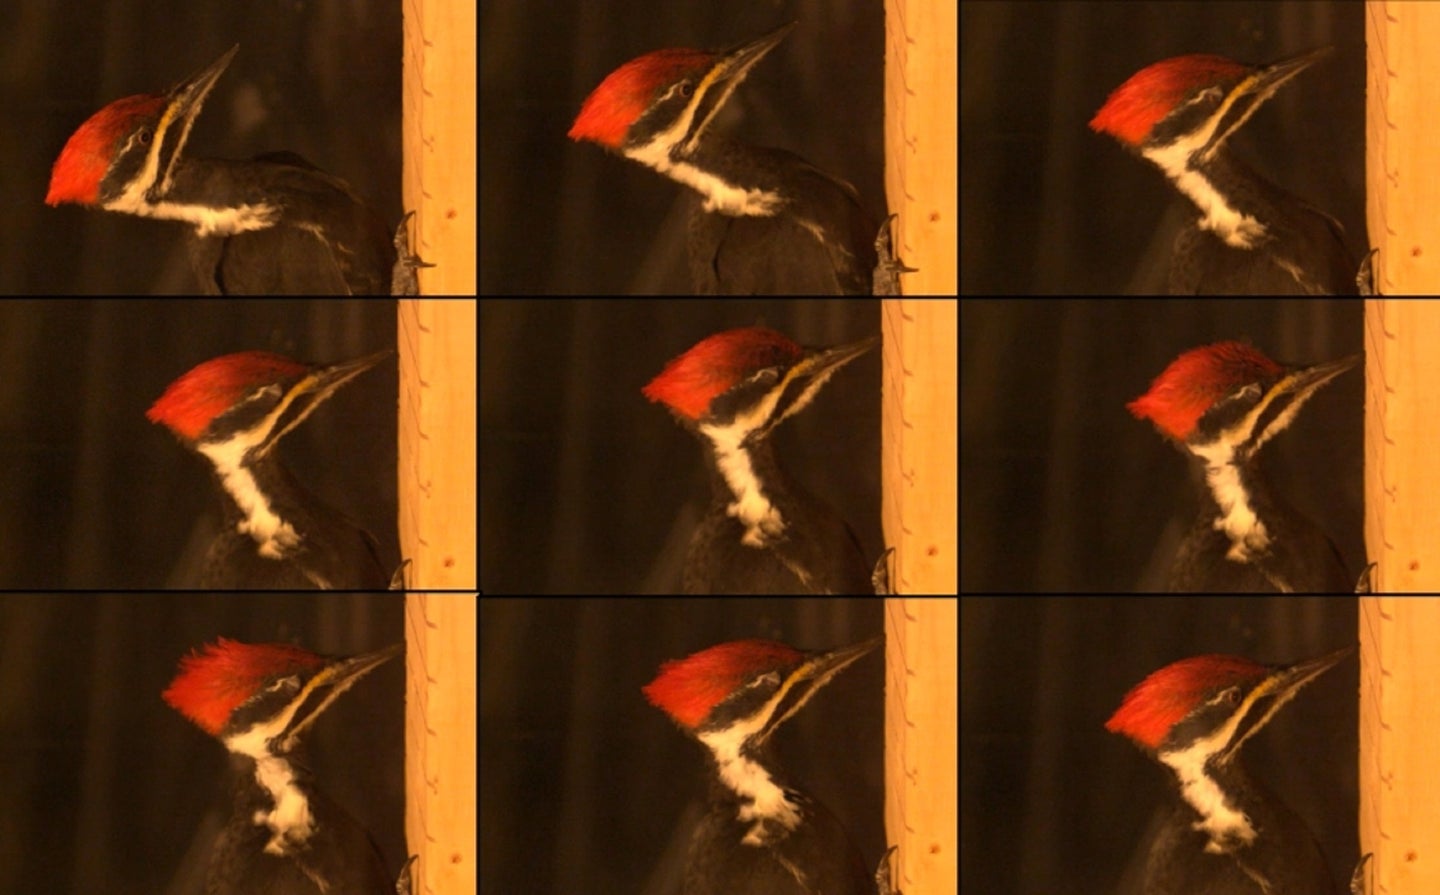 Pileated woodpecker with a red cap and black and white face pecking on wood in nine high speed video frames